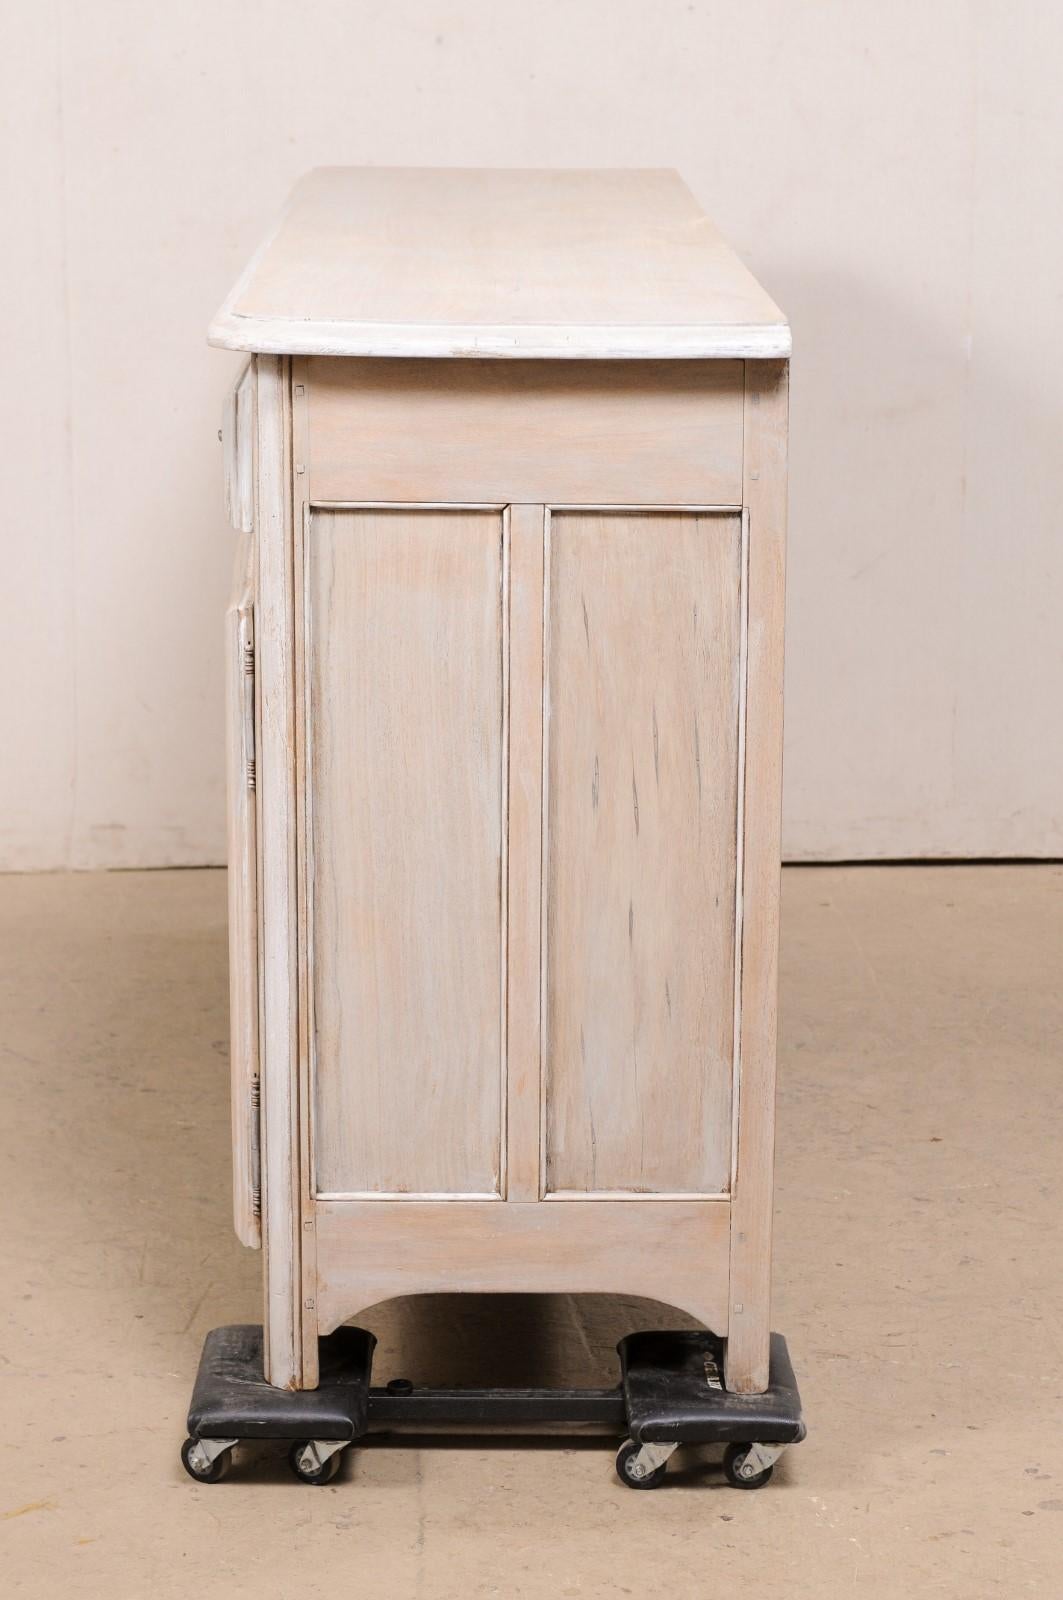 French Painted Credenza Console W/Drawers & Arched Panel Doors, Mid-20th Century For Sale 6